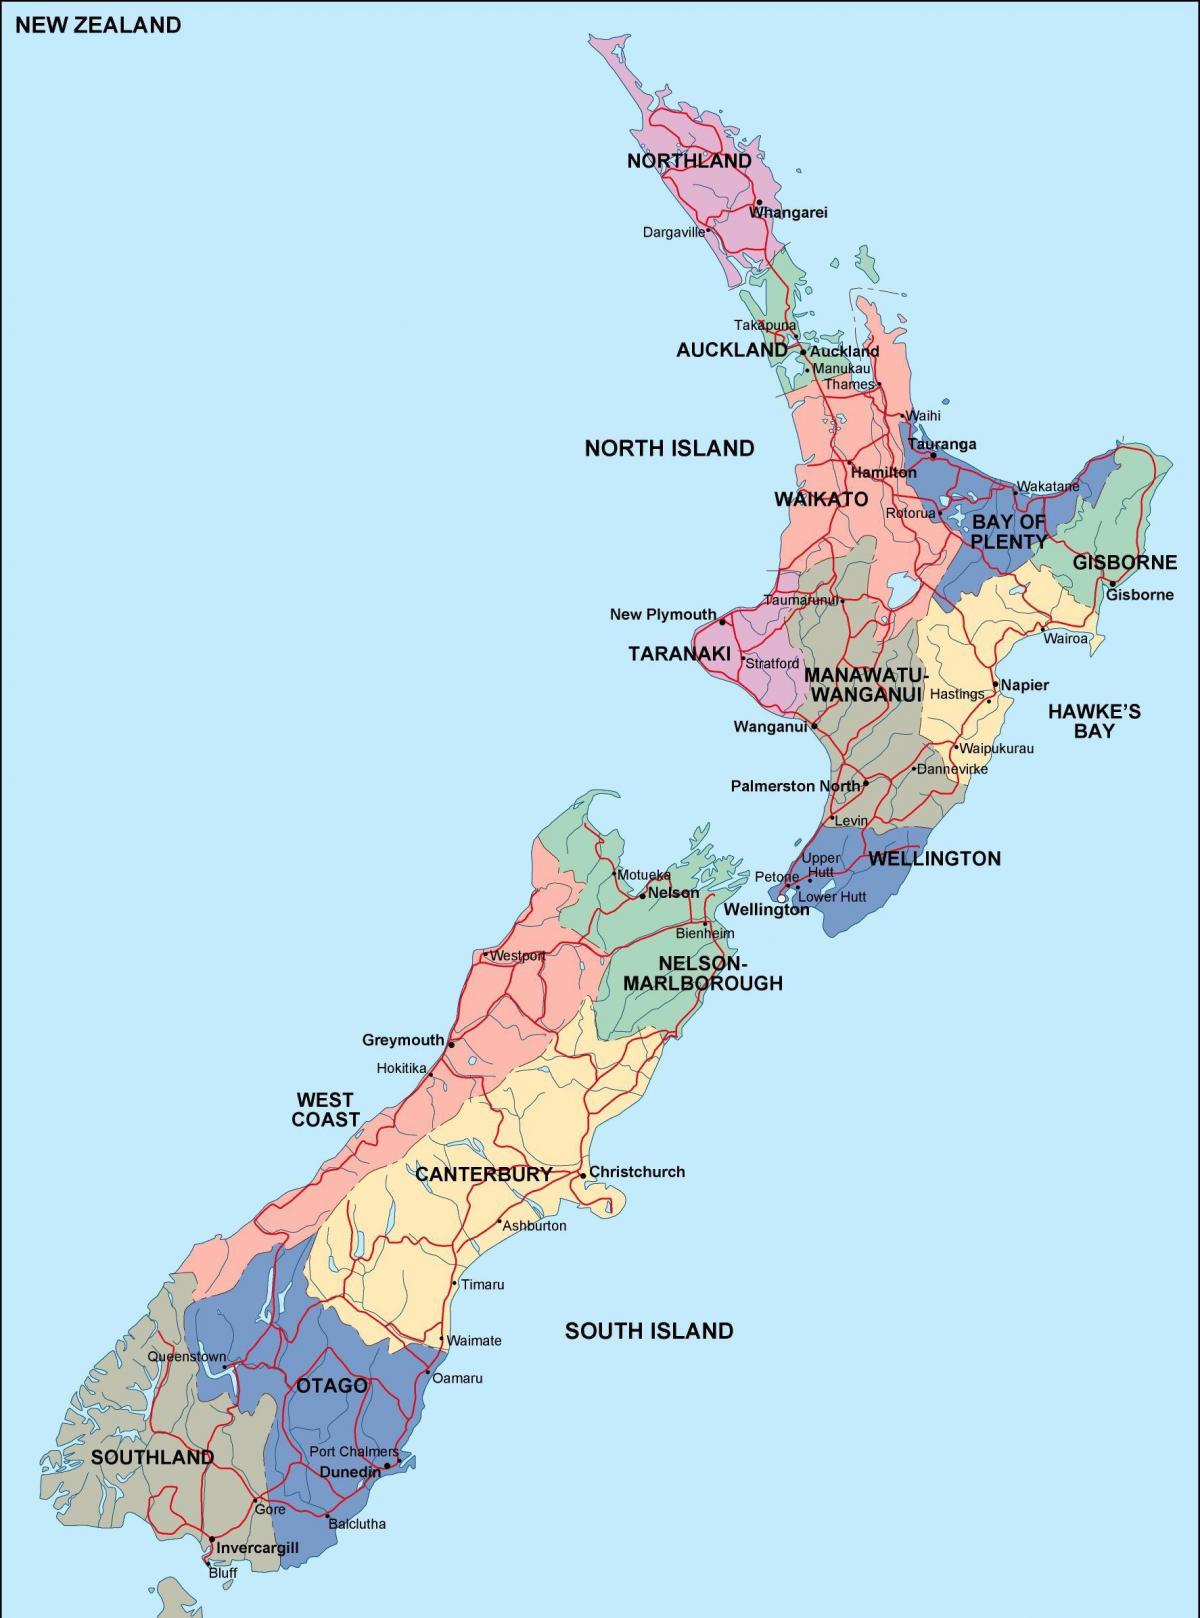 New Zealand state map